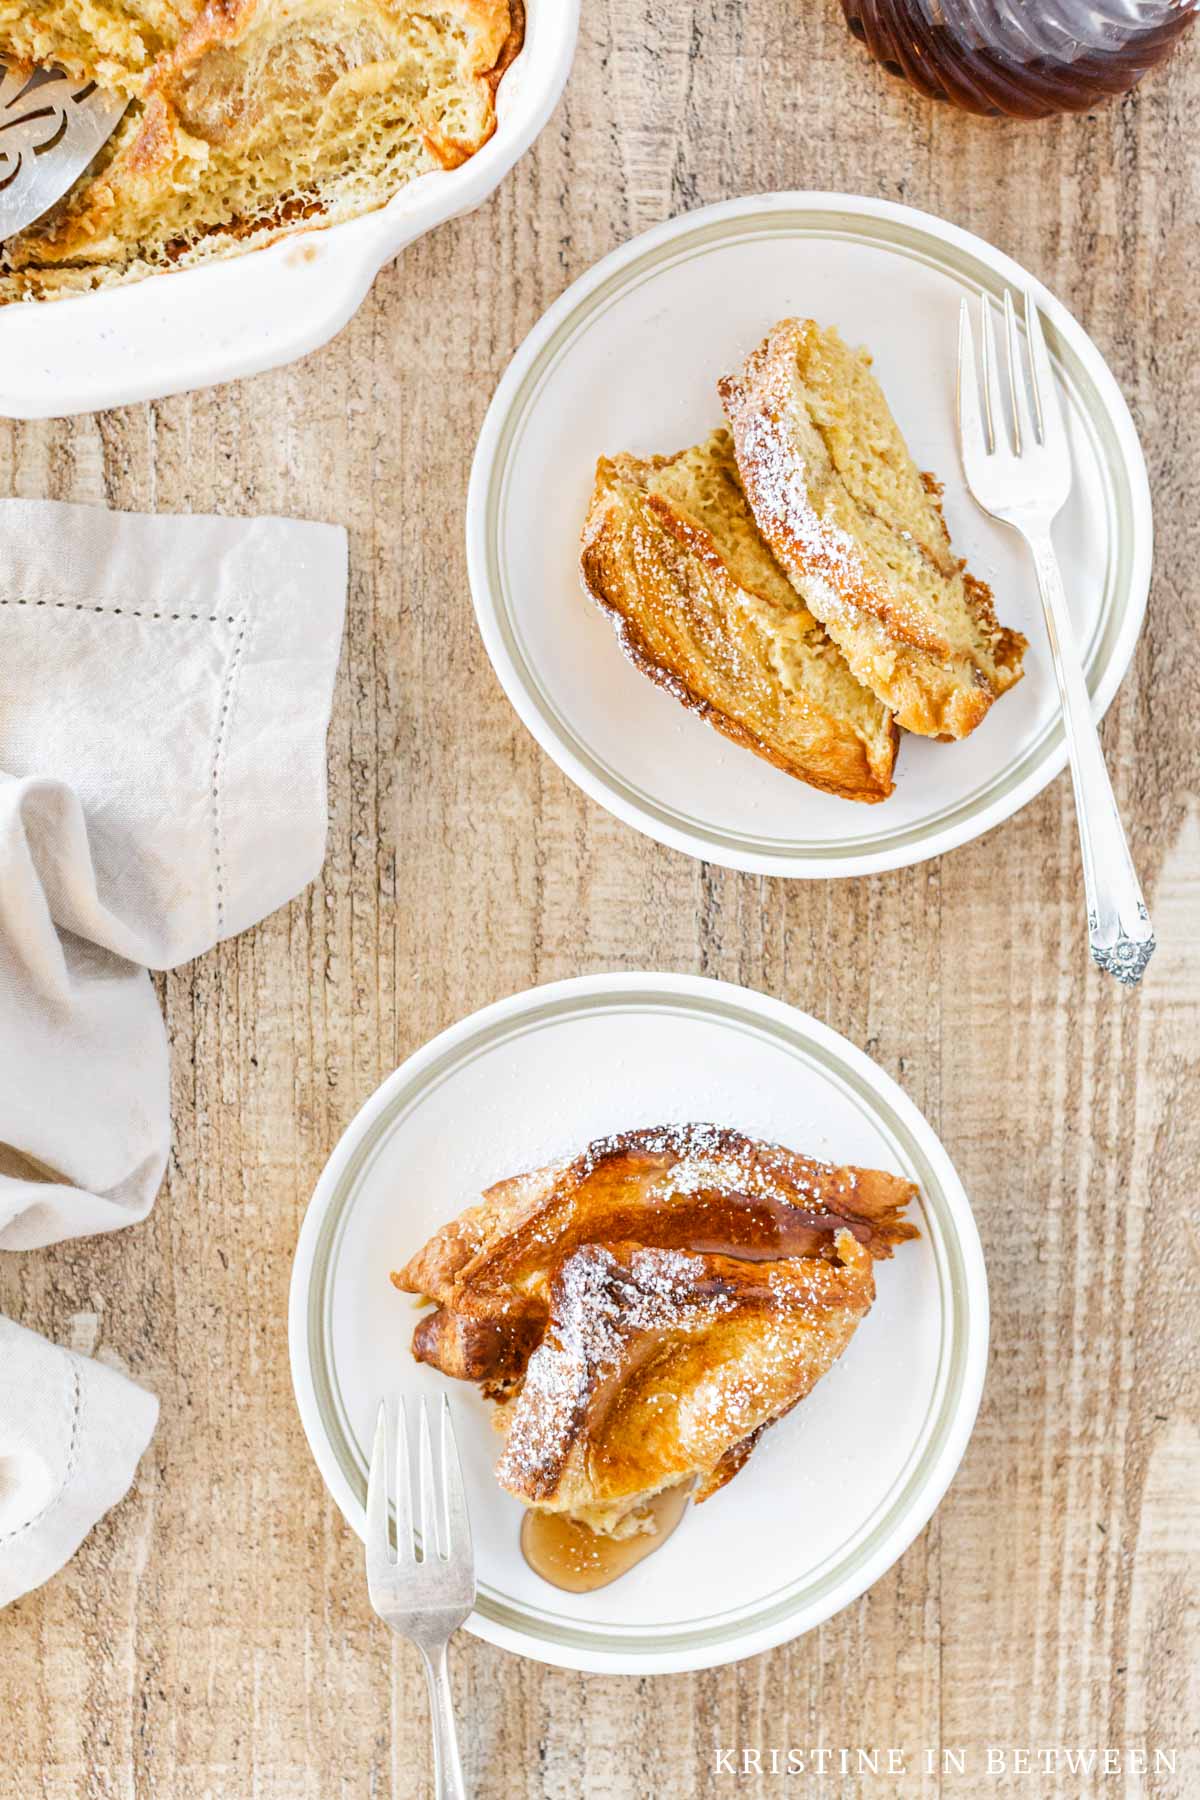 Two plates of baked French toast with forks and a beige napkin sitting next to them.